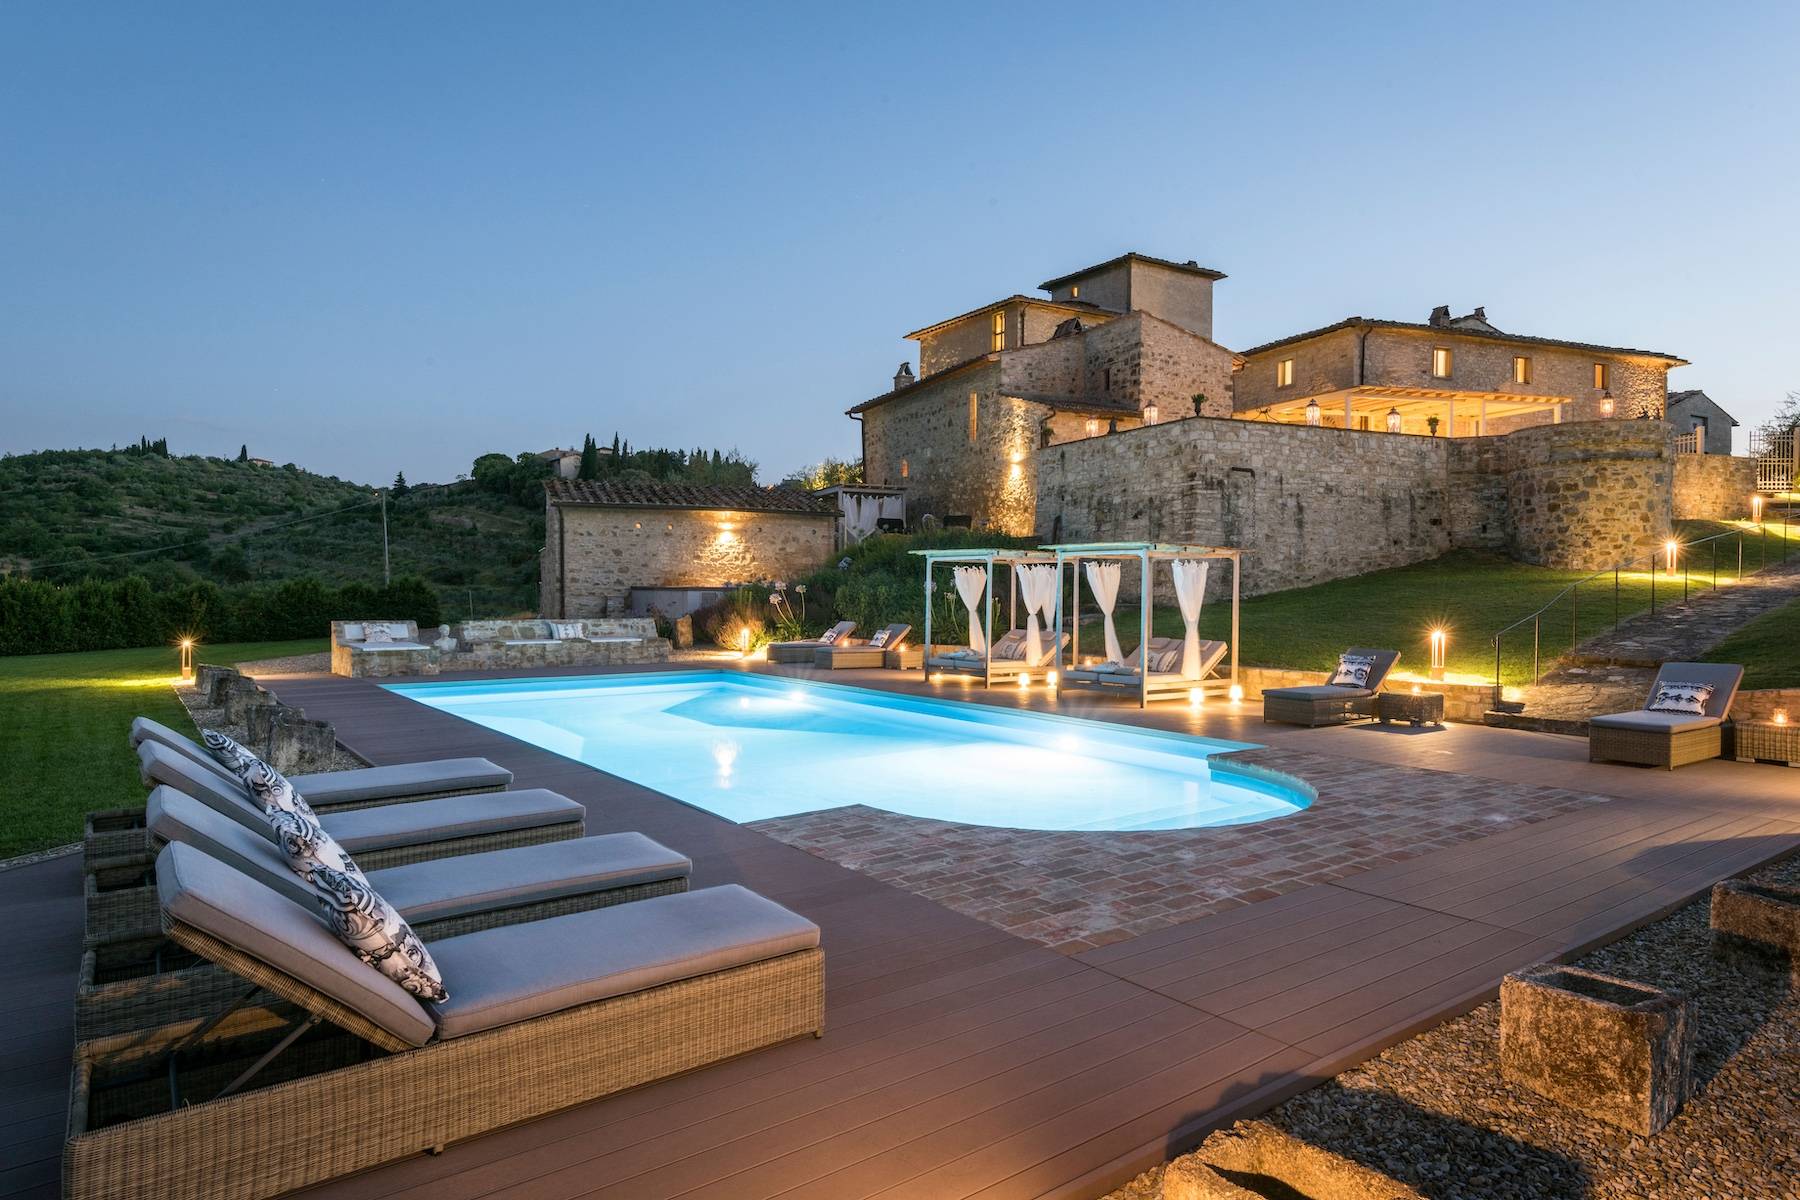 Historic, luxury estate in Greve in Chianti with breathtaking views